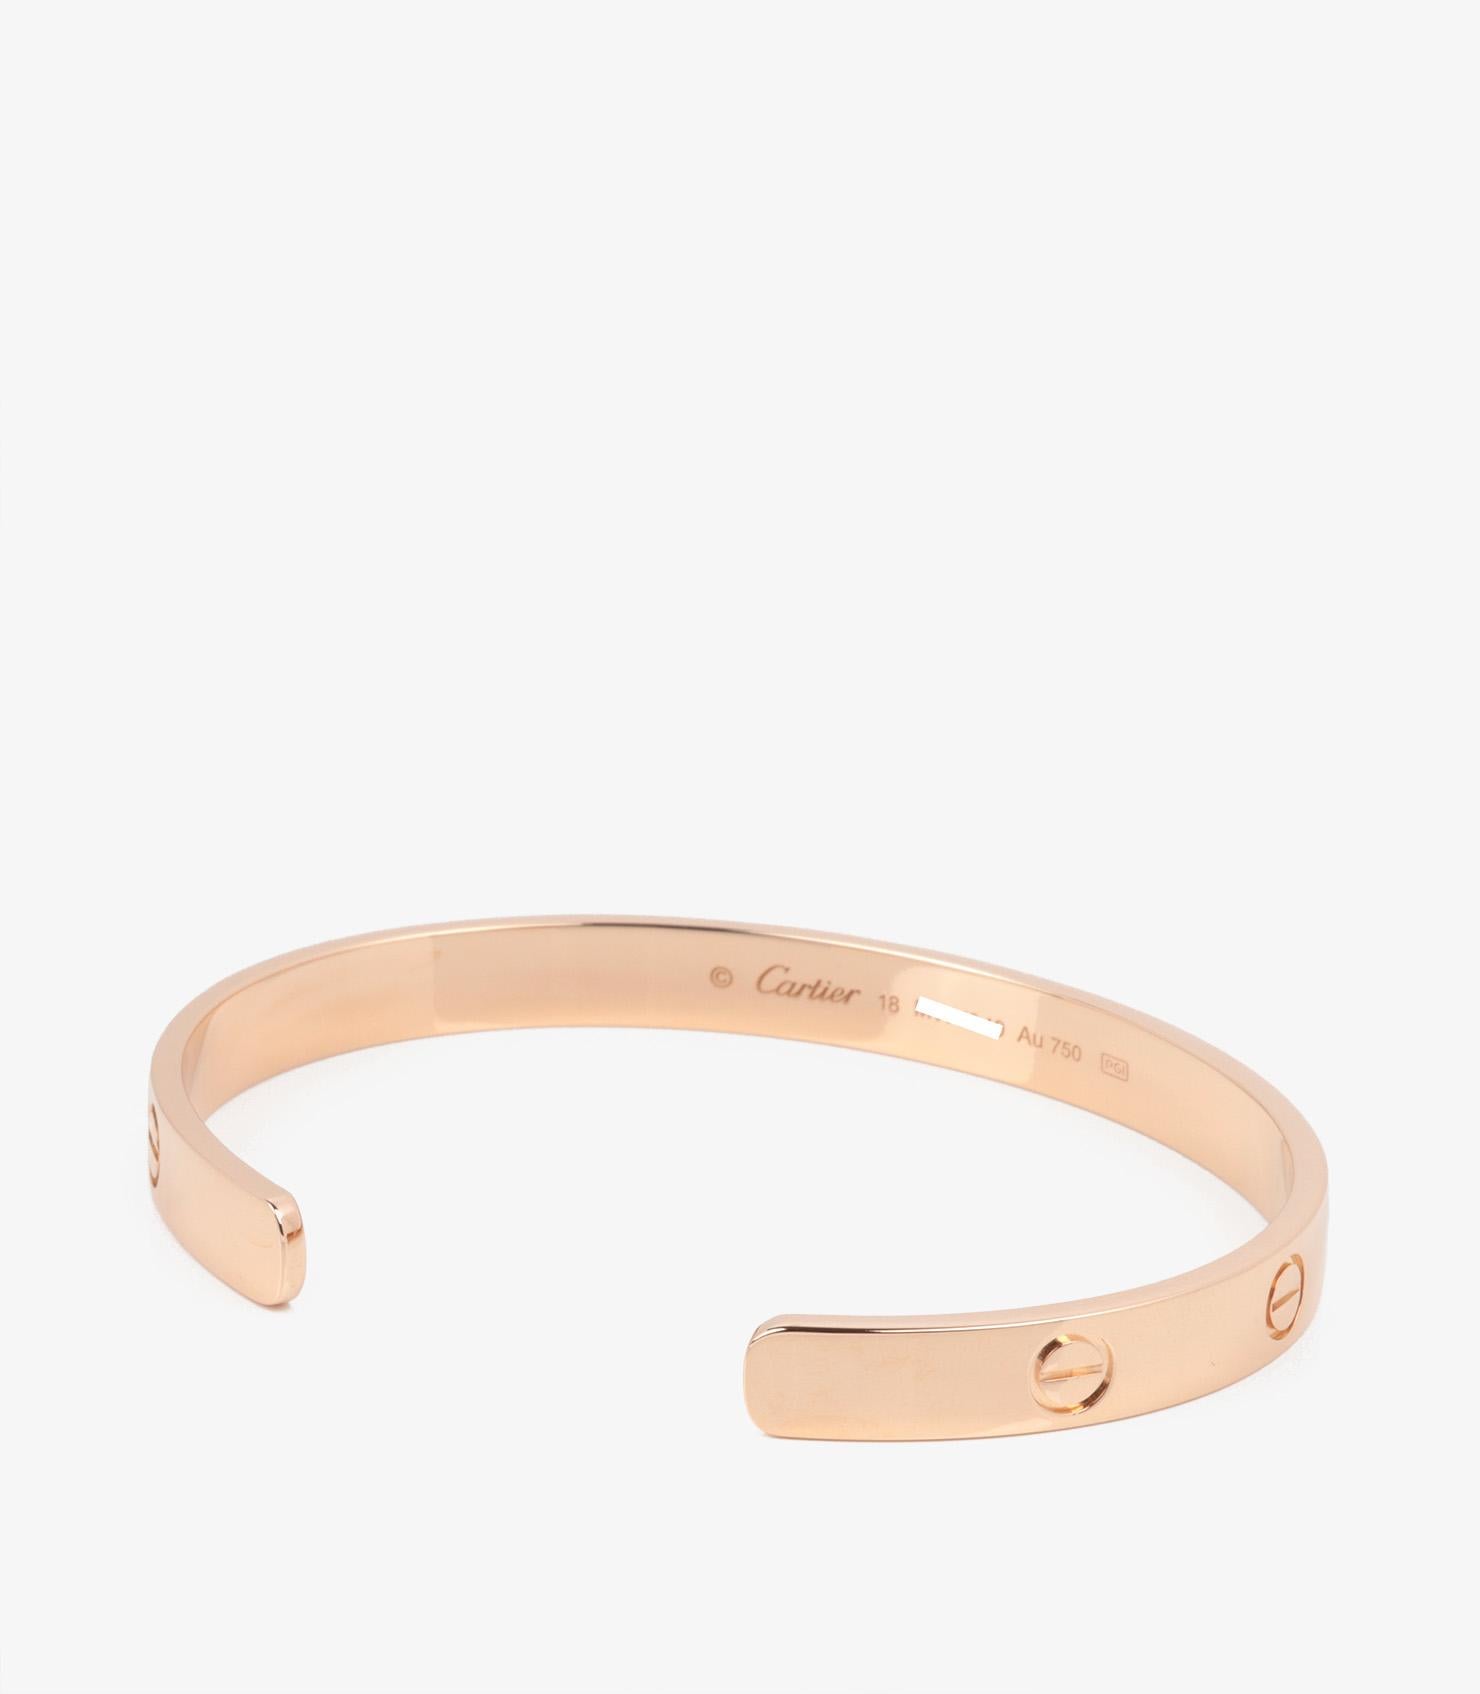 Cartier 18ct Rose Gold Love Cuff Bangle

Brand- Cartier
Model- Love Cuff Bangle
Product Type- Bracelet
Serial Number- MW****
Age- Circa 2022
Accompanied By- Cartier Box, Certificate
Material(s)- 18ct Rose Gold

Bracelet Length- 18cm
Bracelet Width-